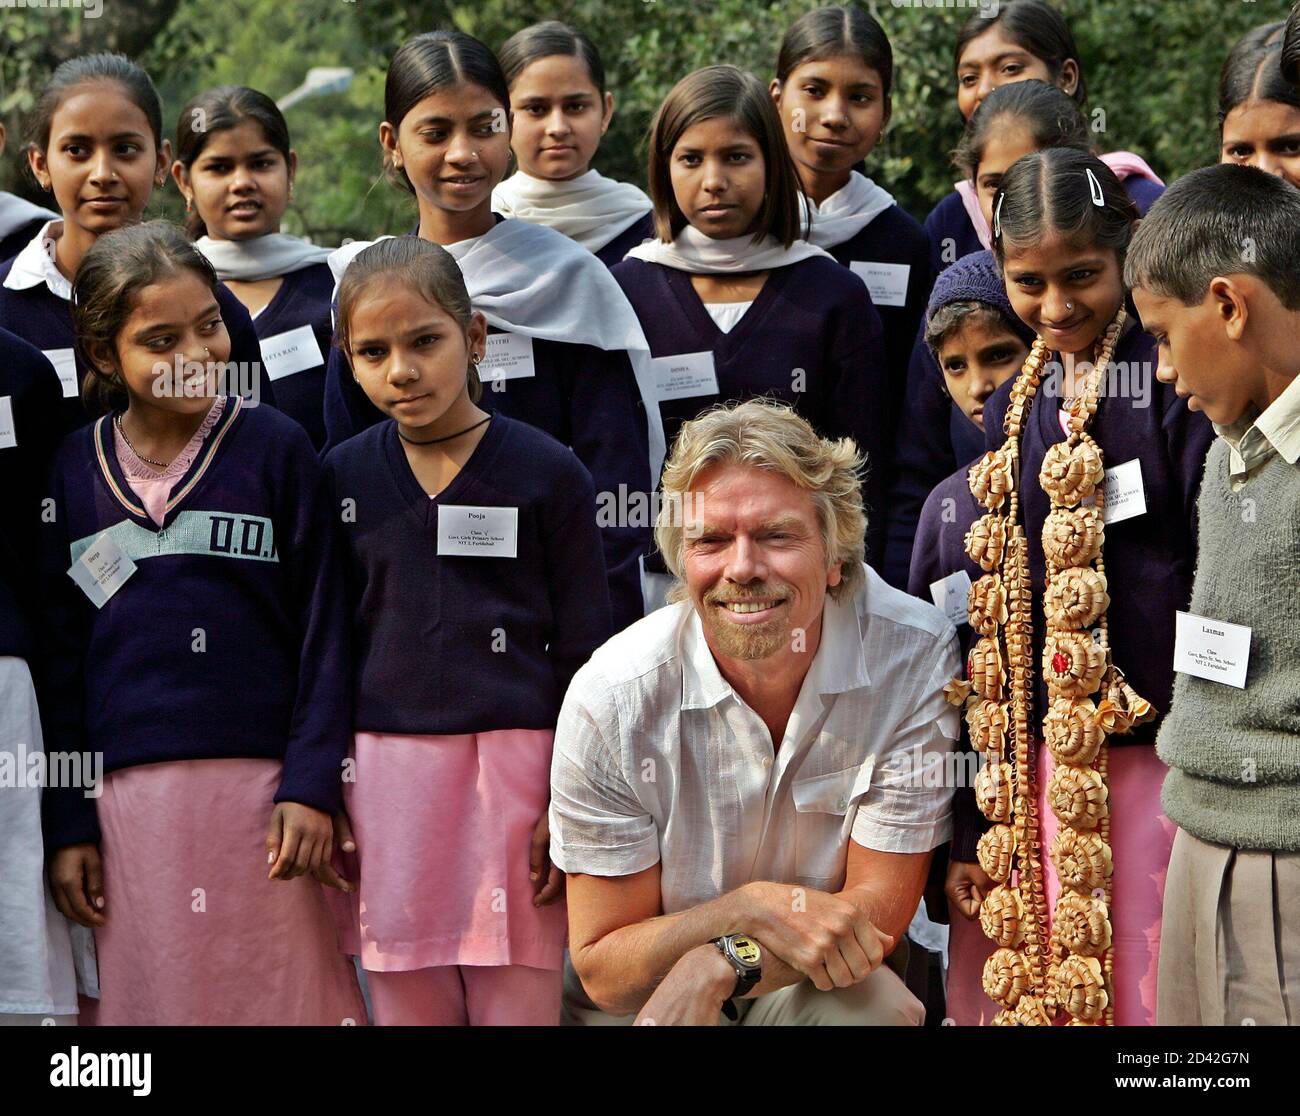 Chief Executive Officer of Virgin Atlantic Airlines Sir Richard Branson sits with Indian children in New Delhi.  Chief Executive Officer of Virgin Atlantic Airlines Sir Richard Branson sits with Indian children in New Delhi on November 27, 2004. The Shrimati Pushpa Wati Loomba Trust is commemorating the completion of five years of educating children of poor widows in India. REUTERS/Desmond Boylan Stock Photo